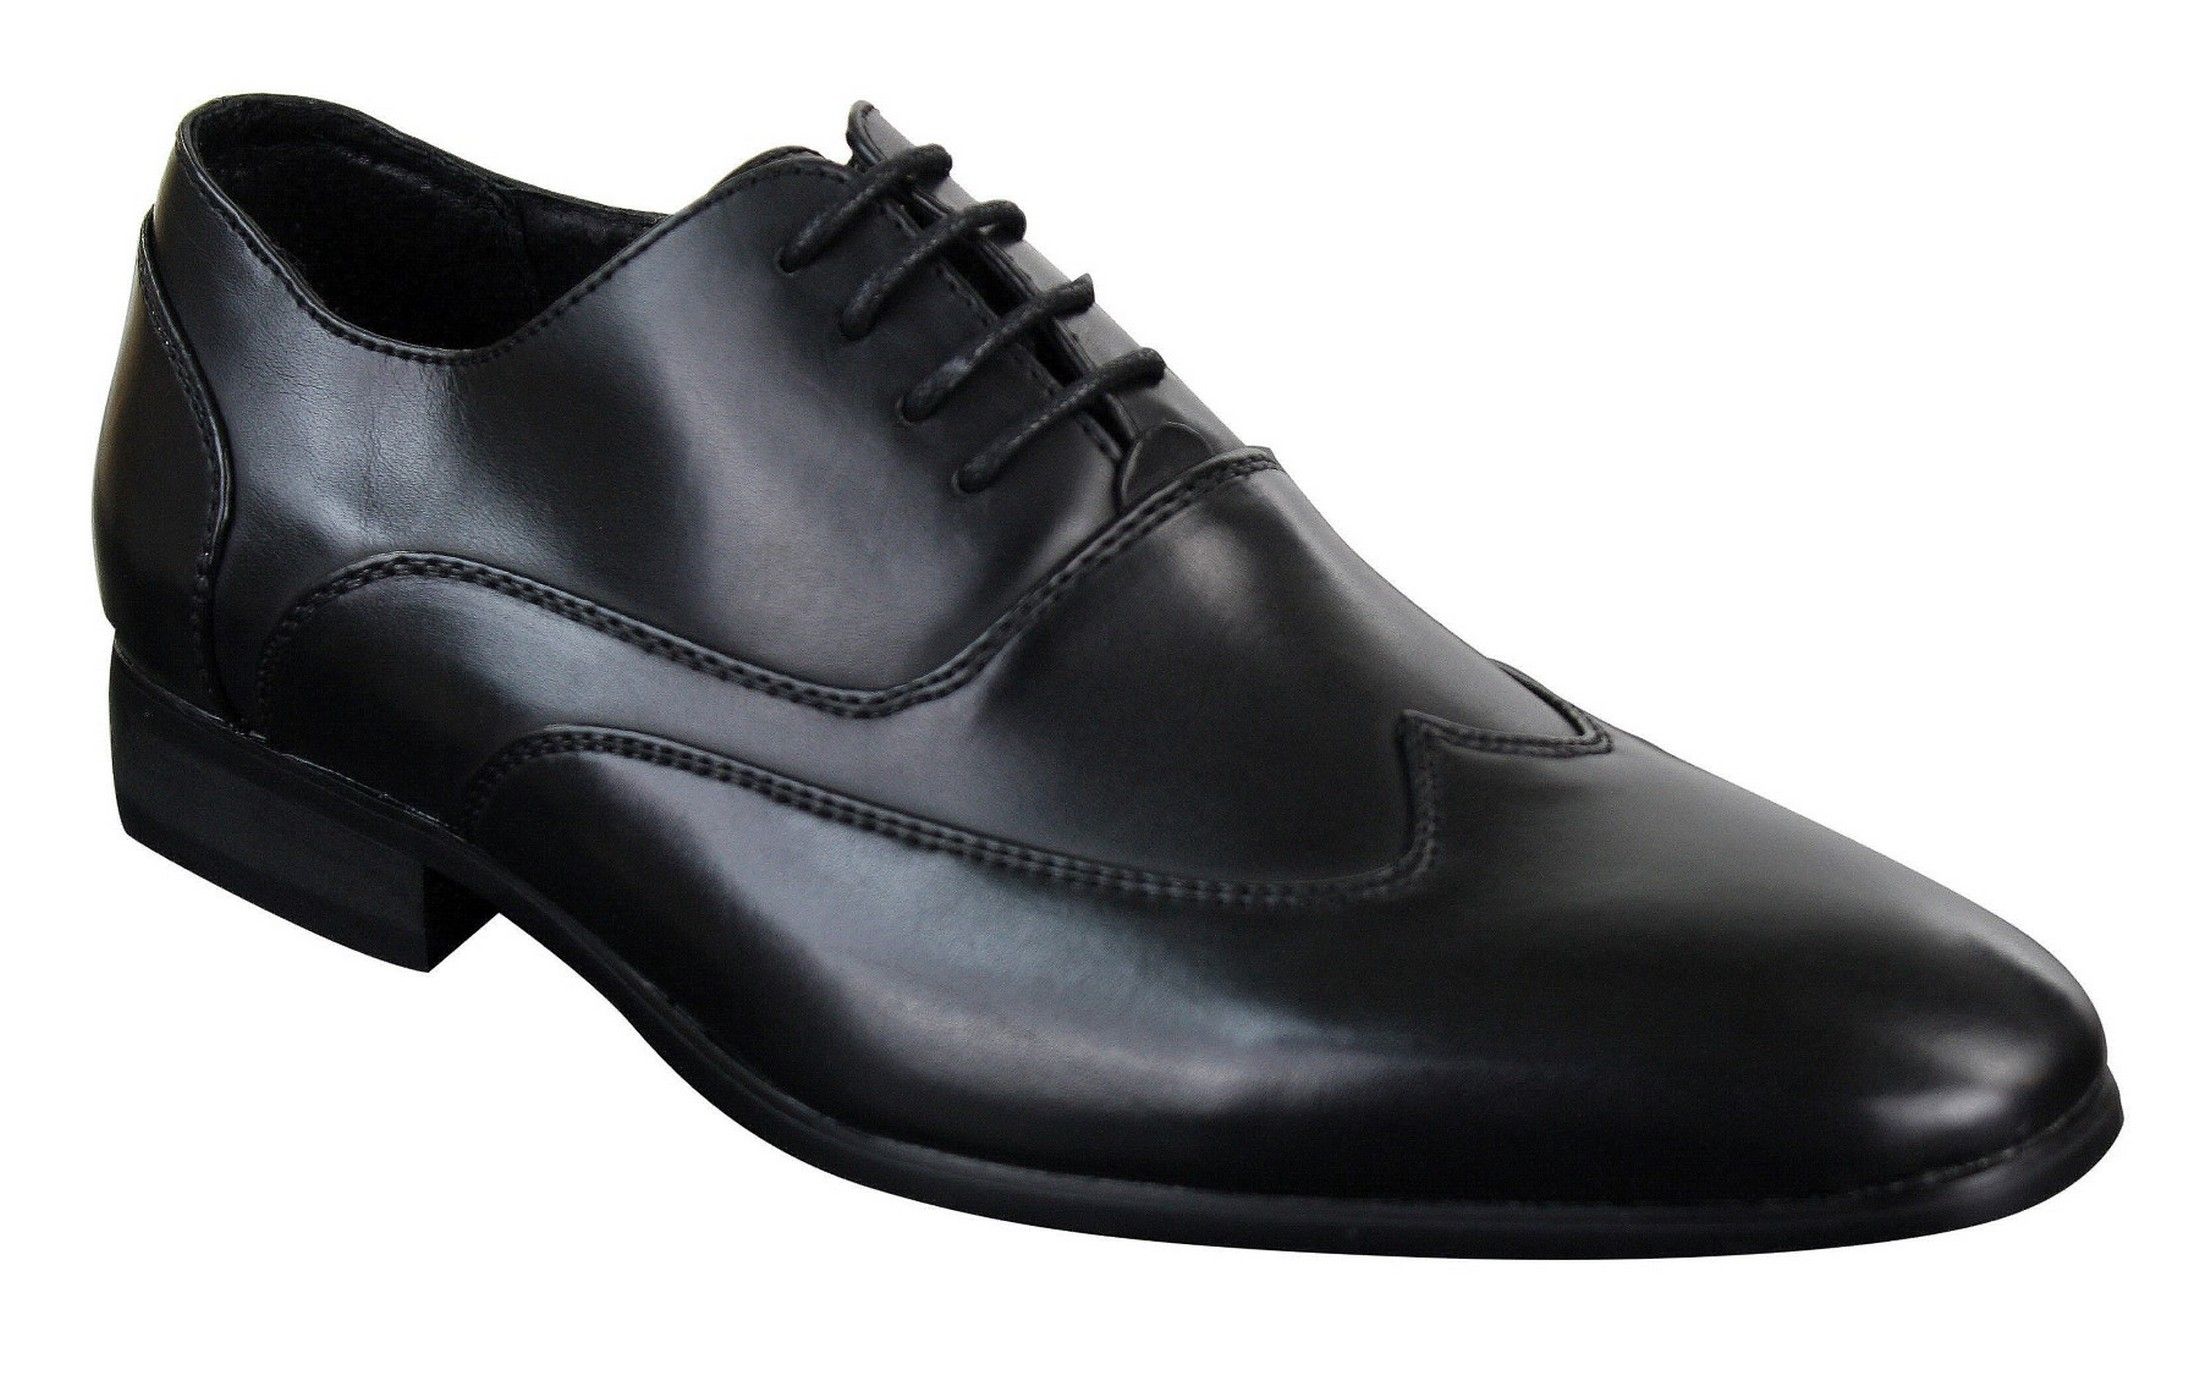 Mens Leather Laced Brogues Italian Designer Shoes Smart Formal Classic Retro Black 5 